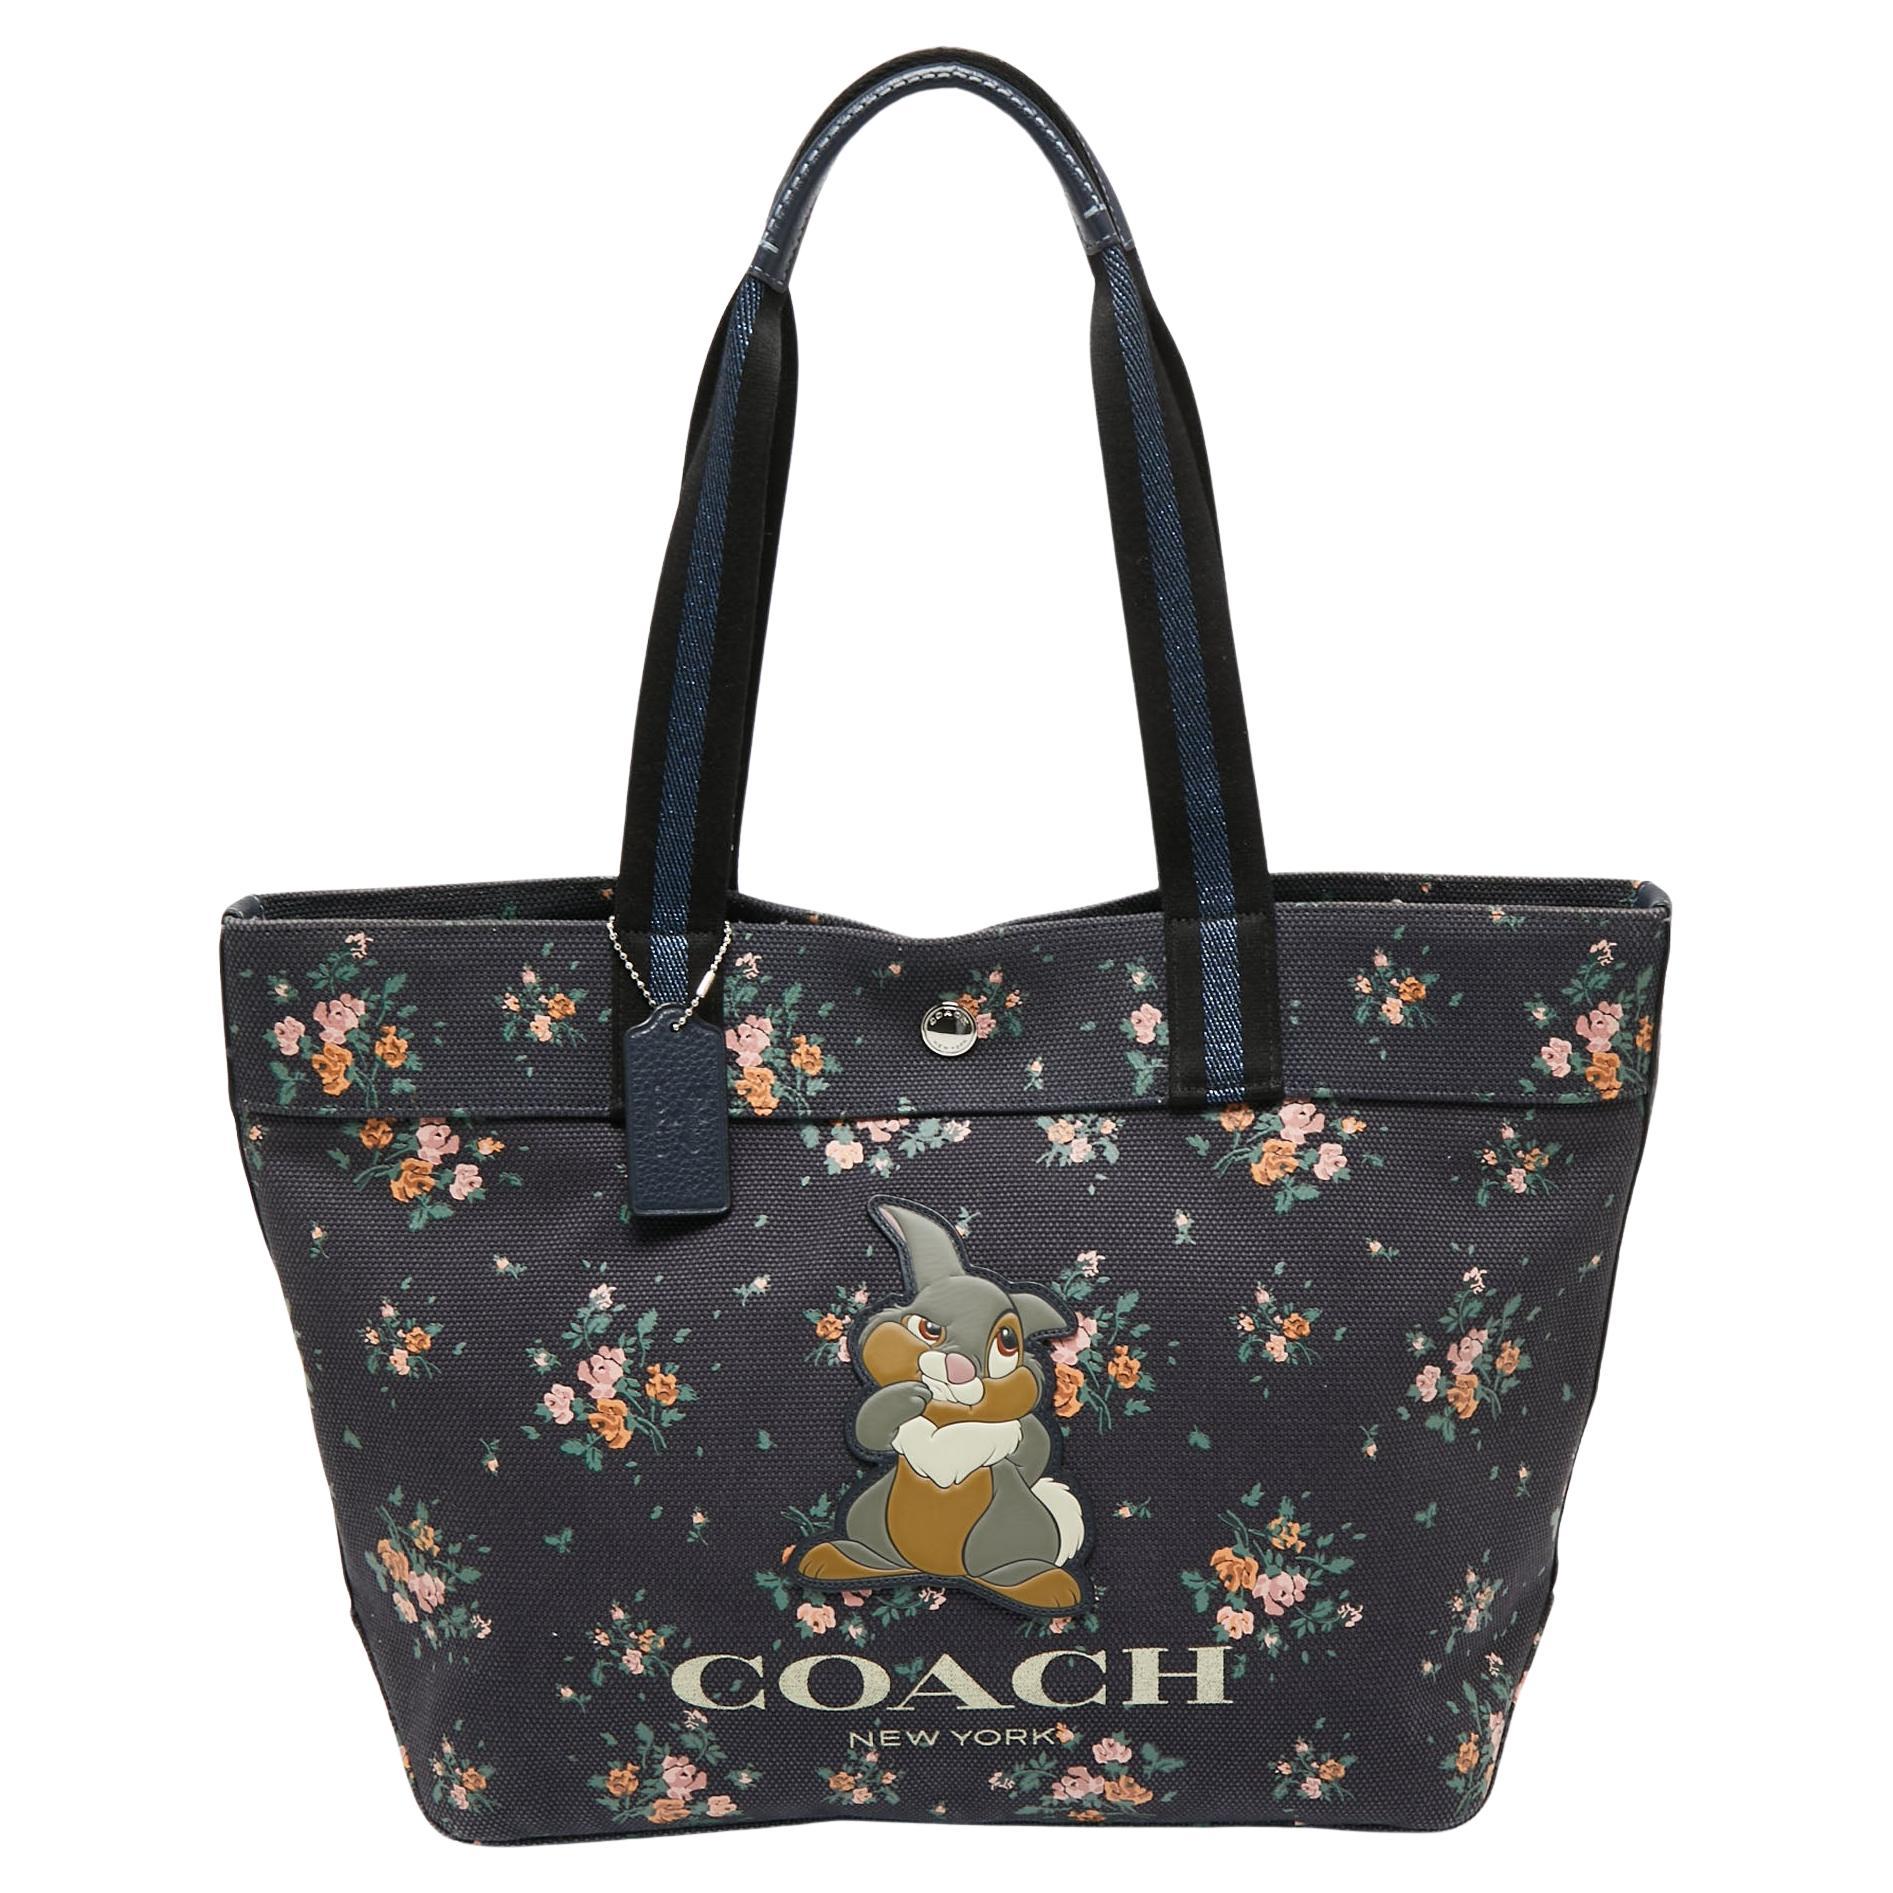 Coach x Disney Navy Blue Rose Bouquet Print and Thumper Canvas Tote